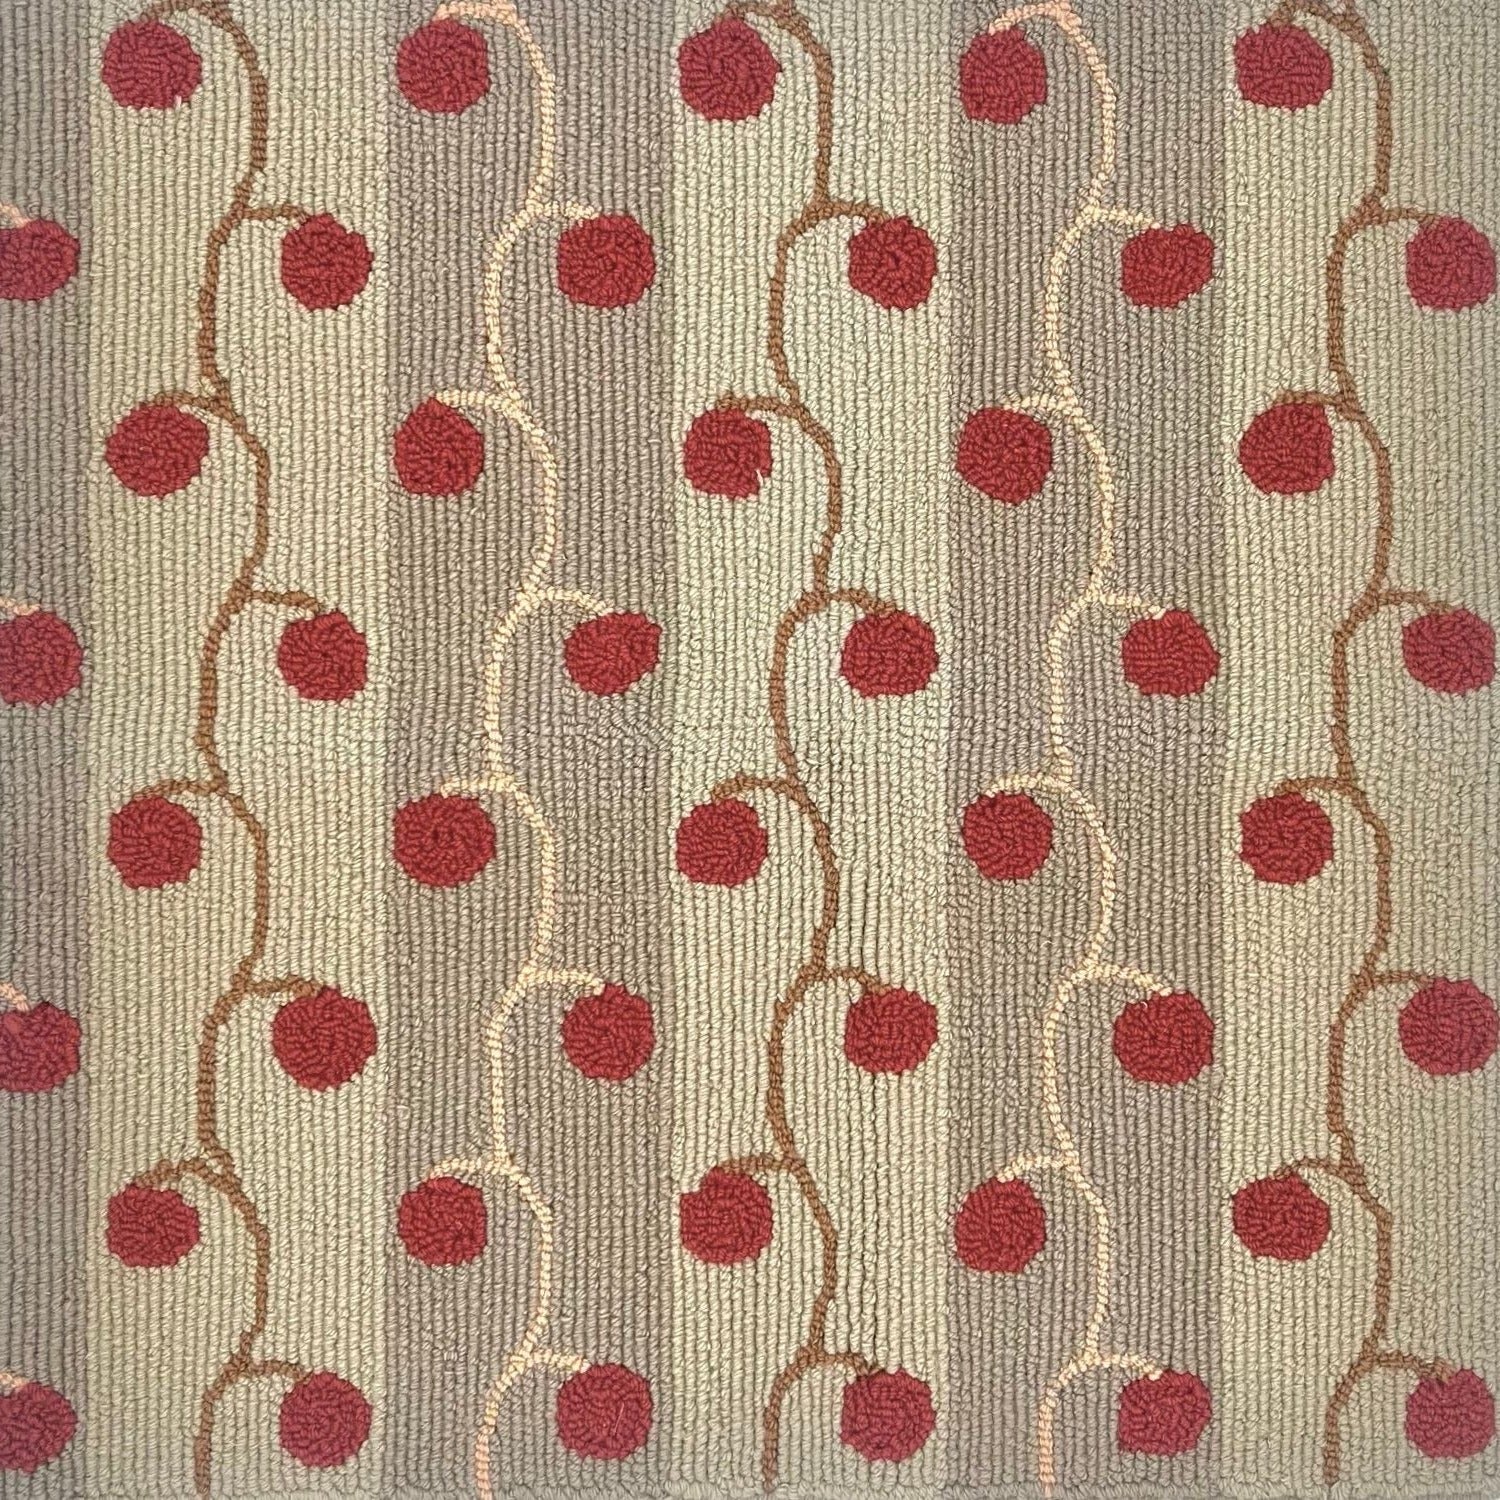 Detail of handtufted rugh with red cherry vines against neutral stripes